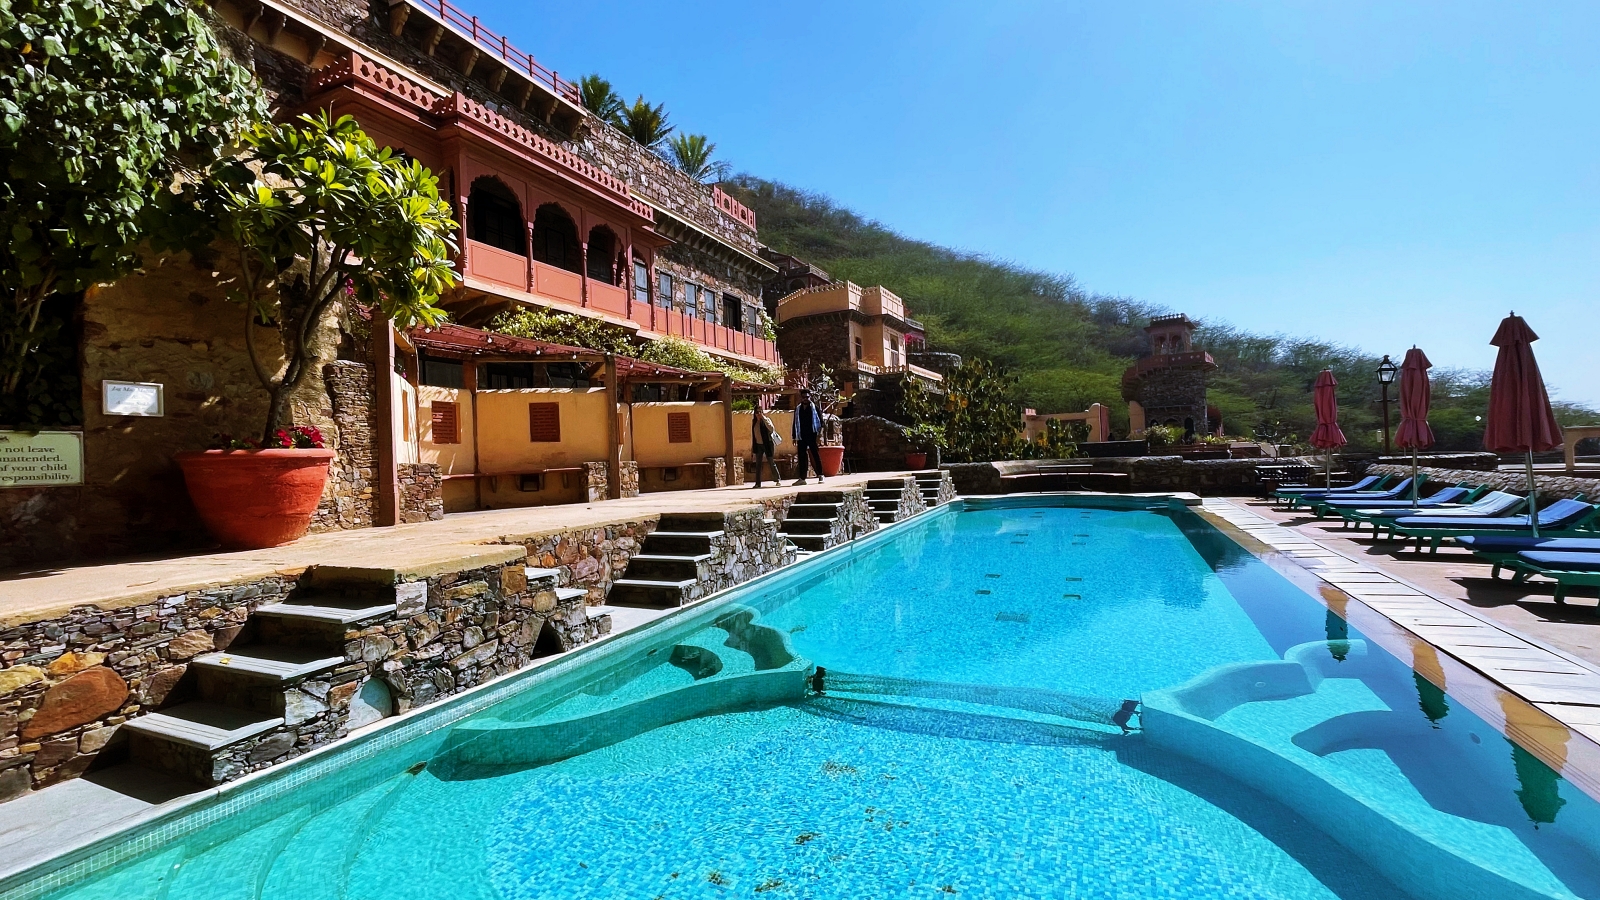 Things to do in Neemrana in Rajasthan in India